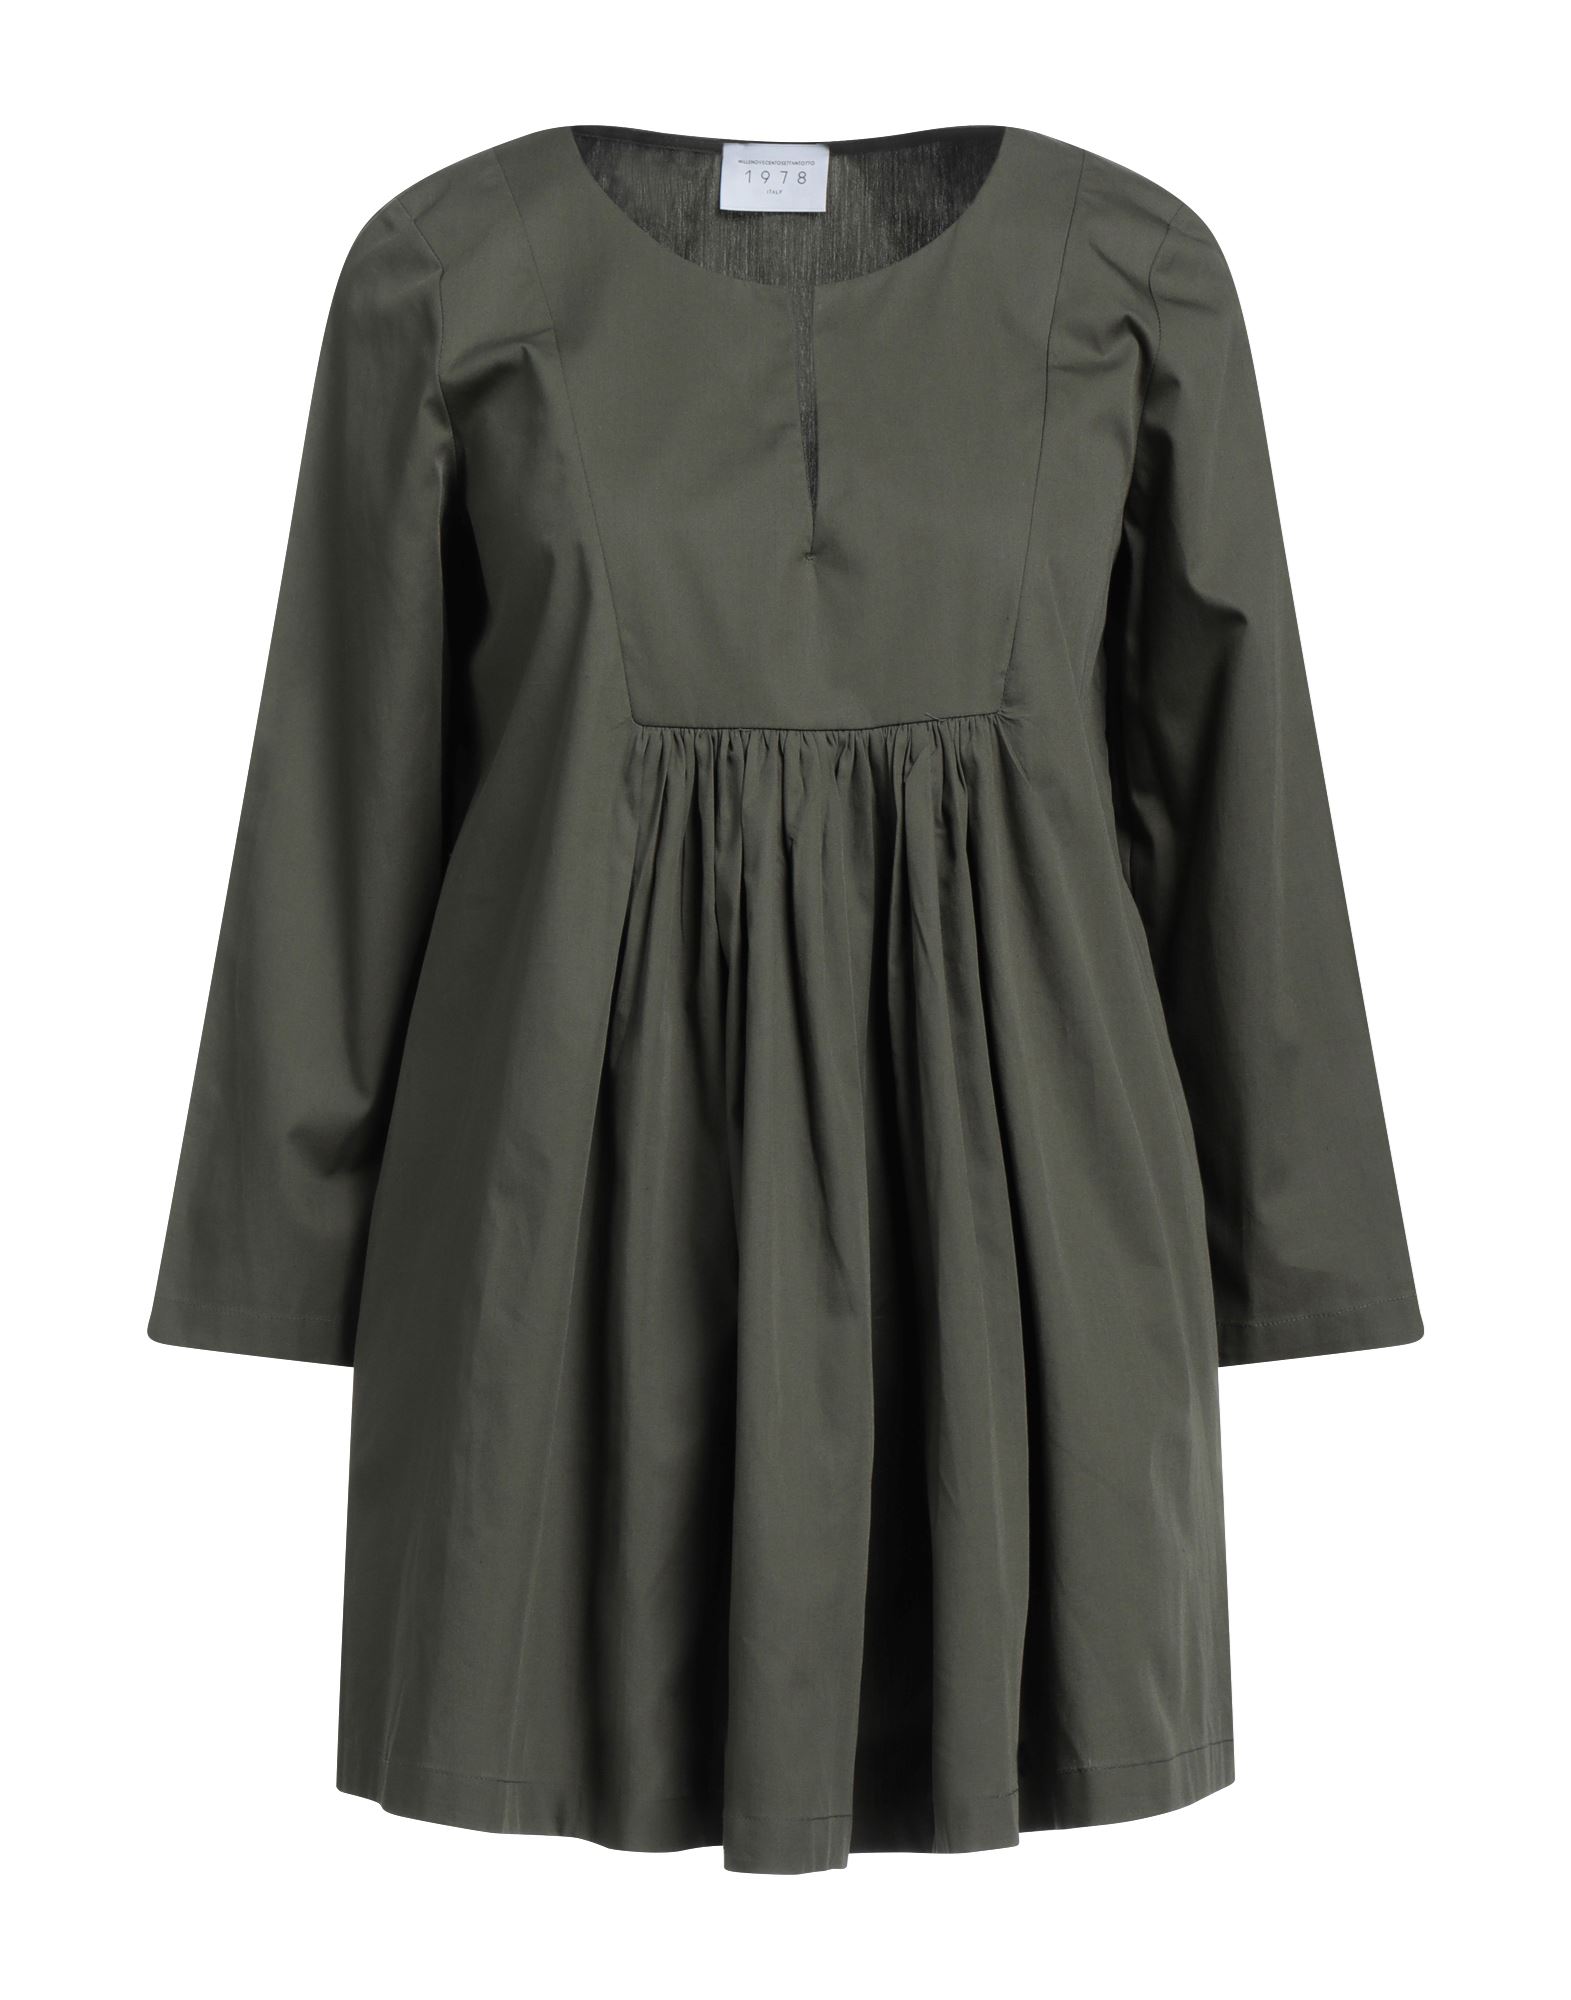 Millenovecentosettantotto Blouses In Military Green